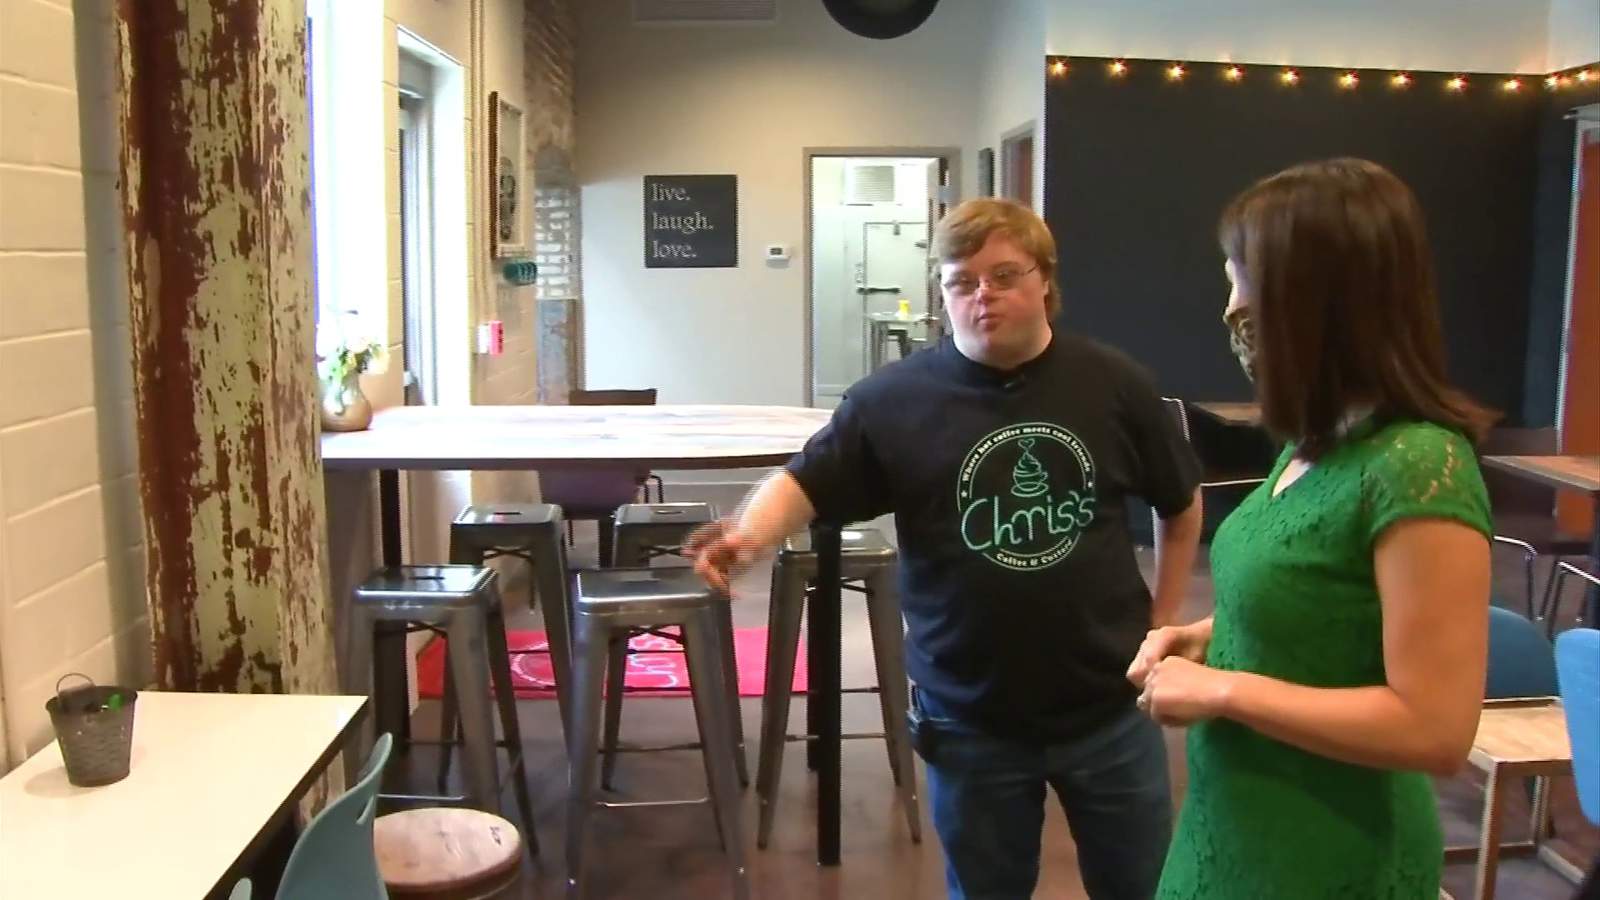 Roanoke coffee shop hiring people with special abilities to open in the fall